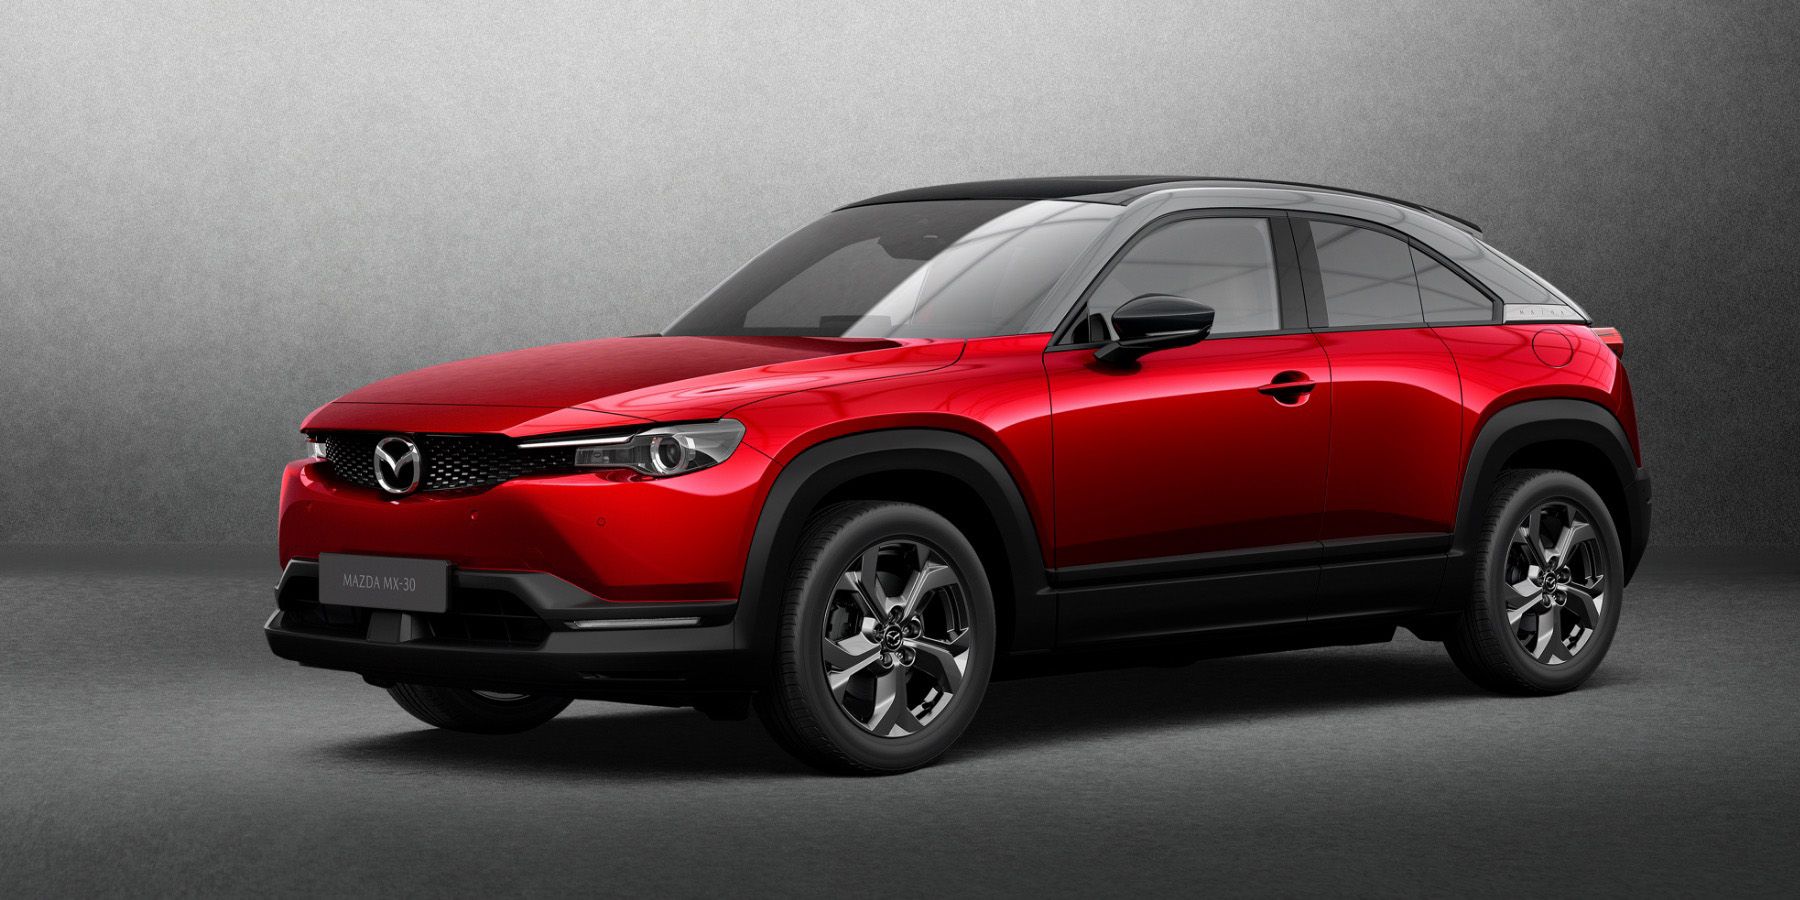 Mazda Unveils Its Electric MX-30 for the U.S.